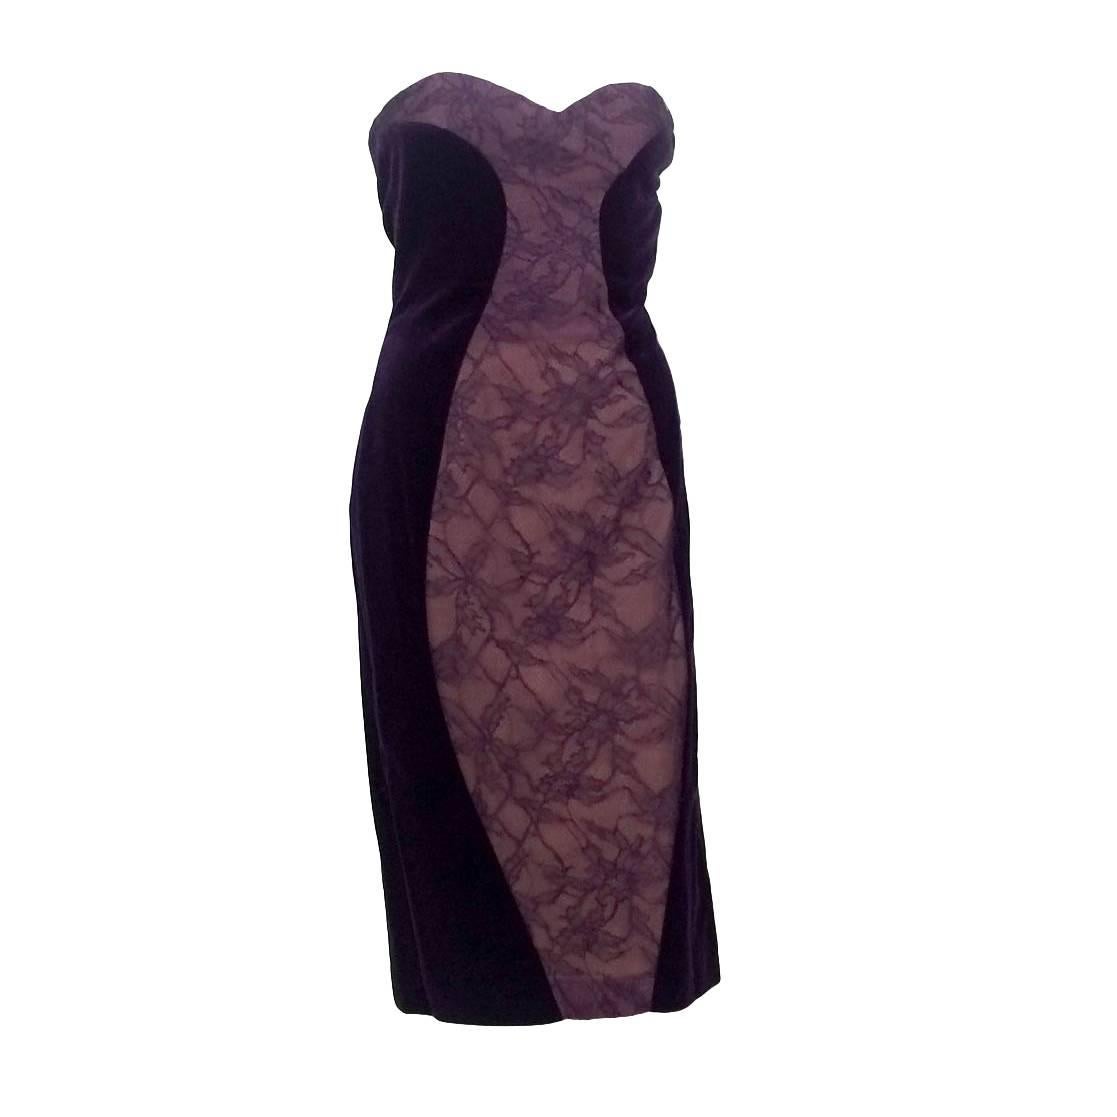 Paco Rabanne Velvet and Lace Dress - 1970s For Sale